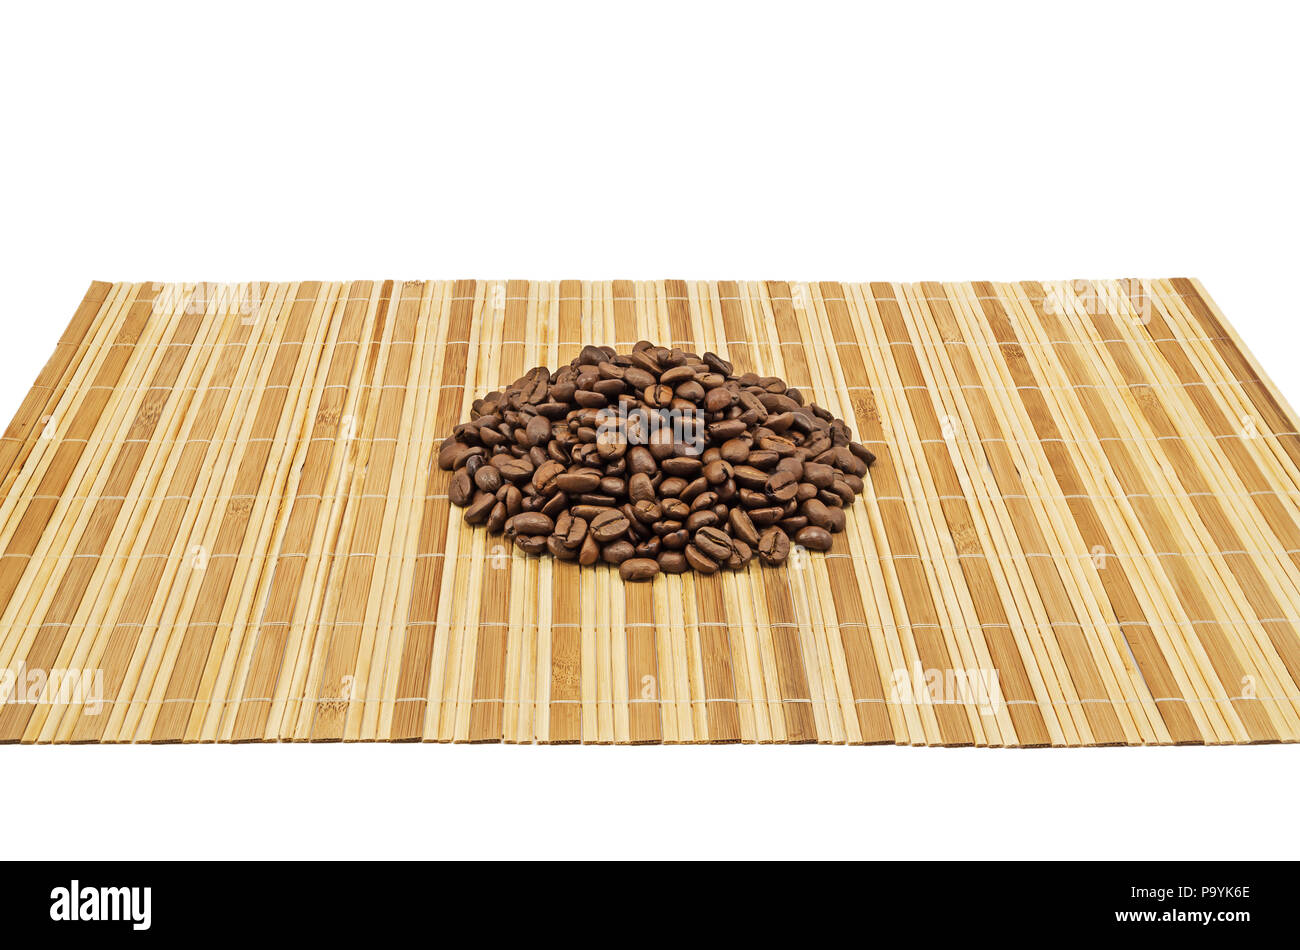 A bunch of fried coffee beans on eastern reed mat litter Stock Photo